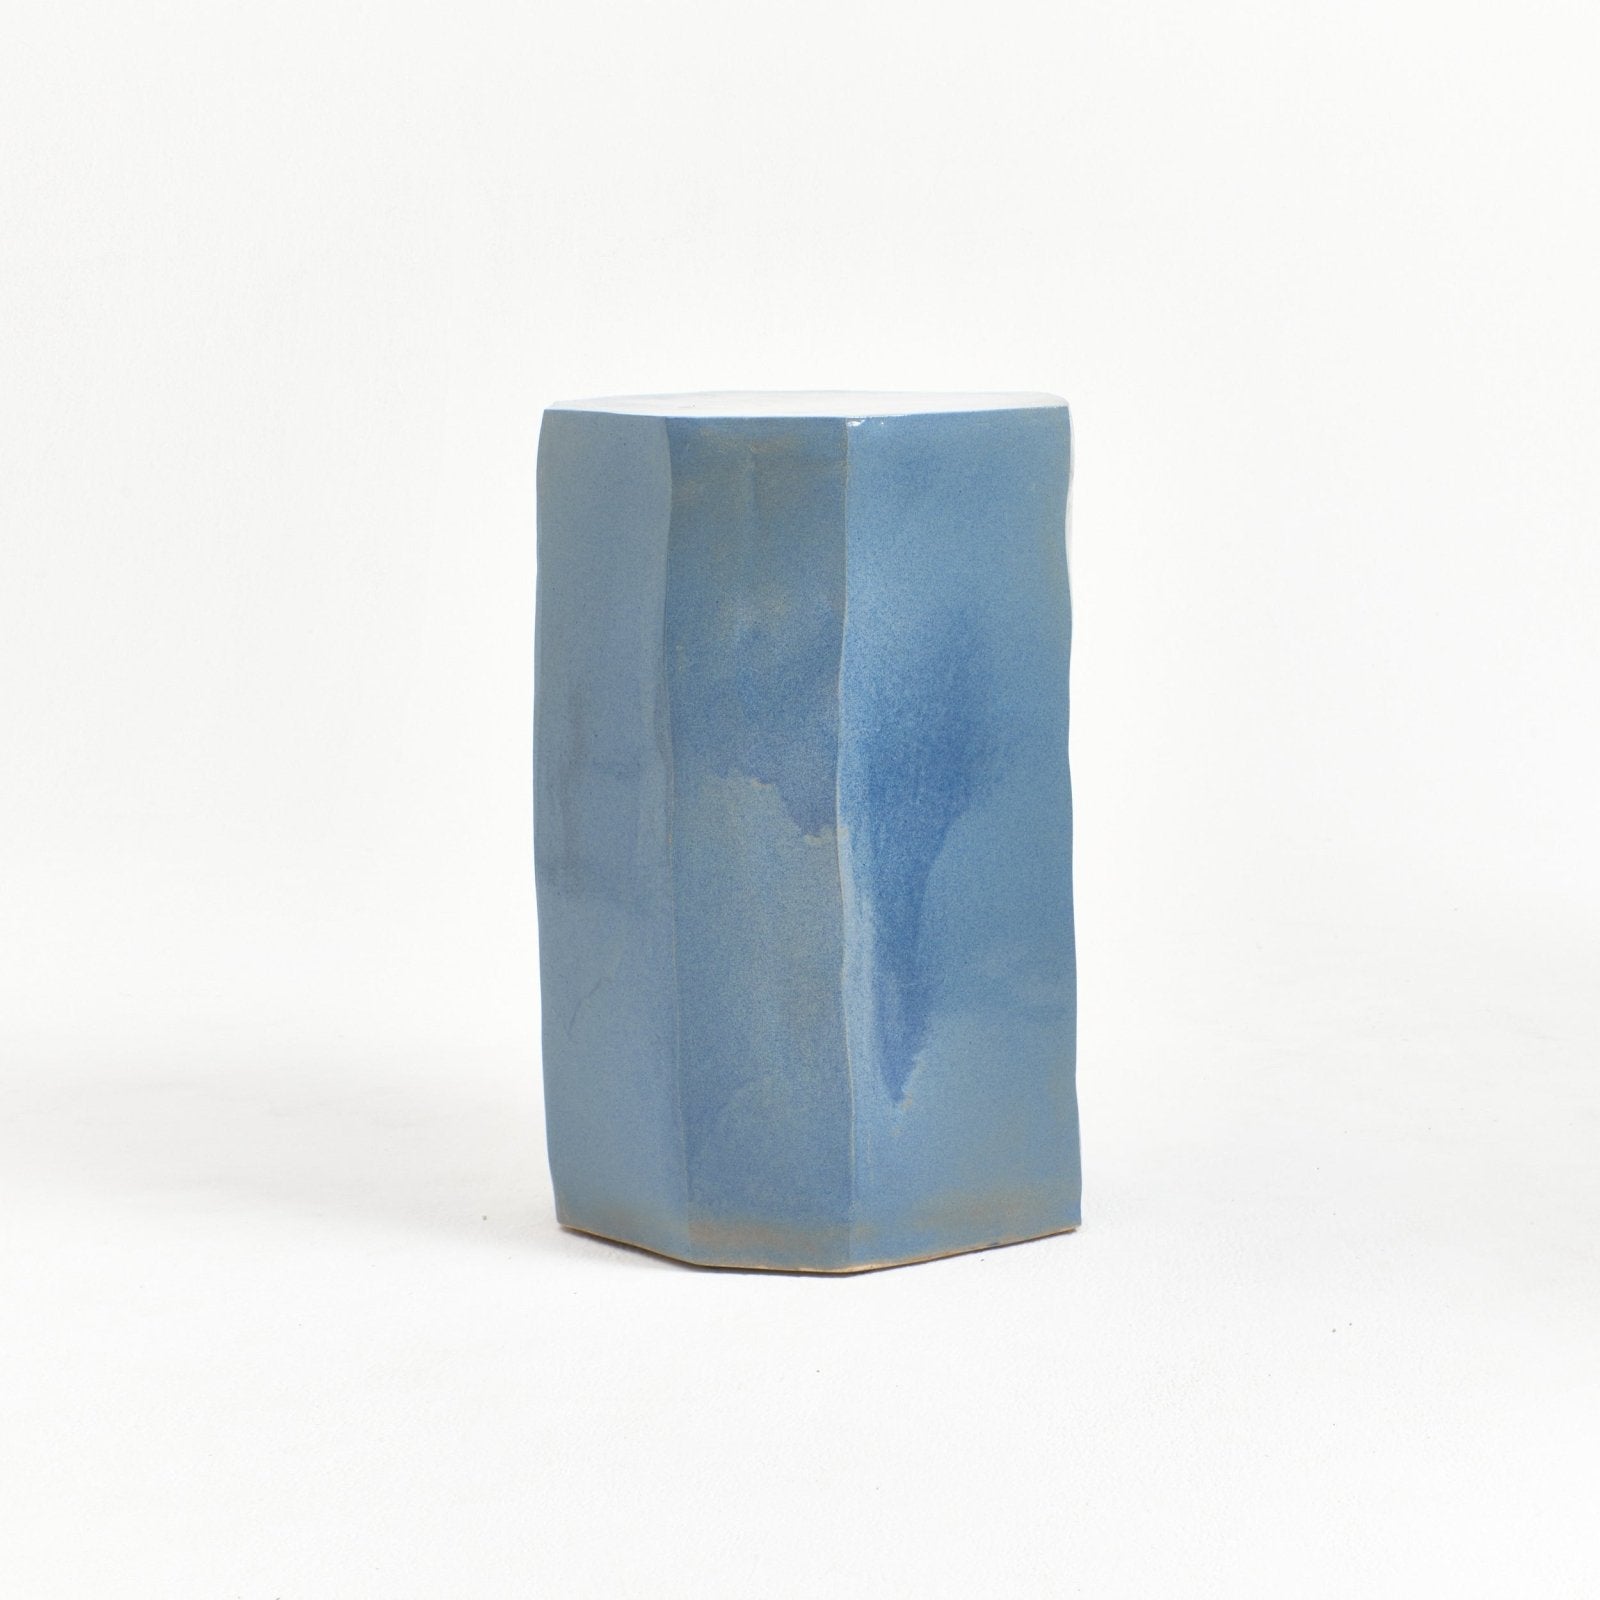 Ceramic Denim Blue - Ceramic side table Tables by Project 213A